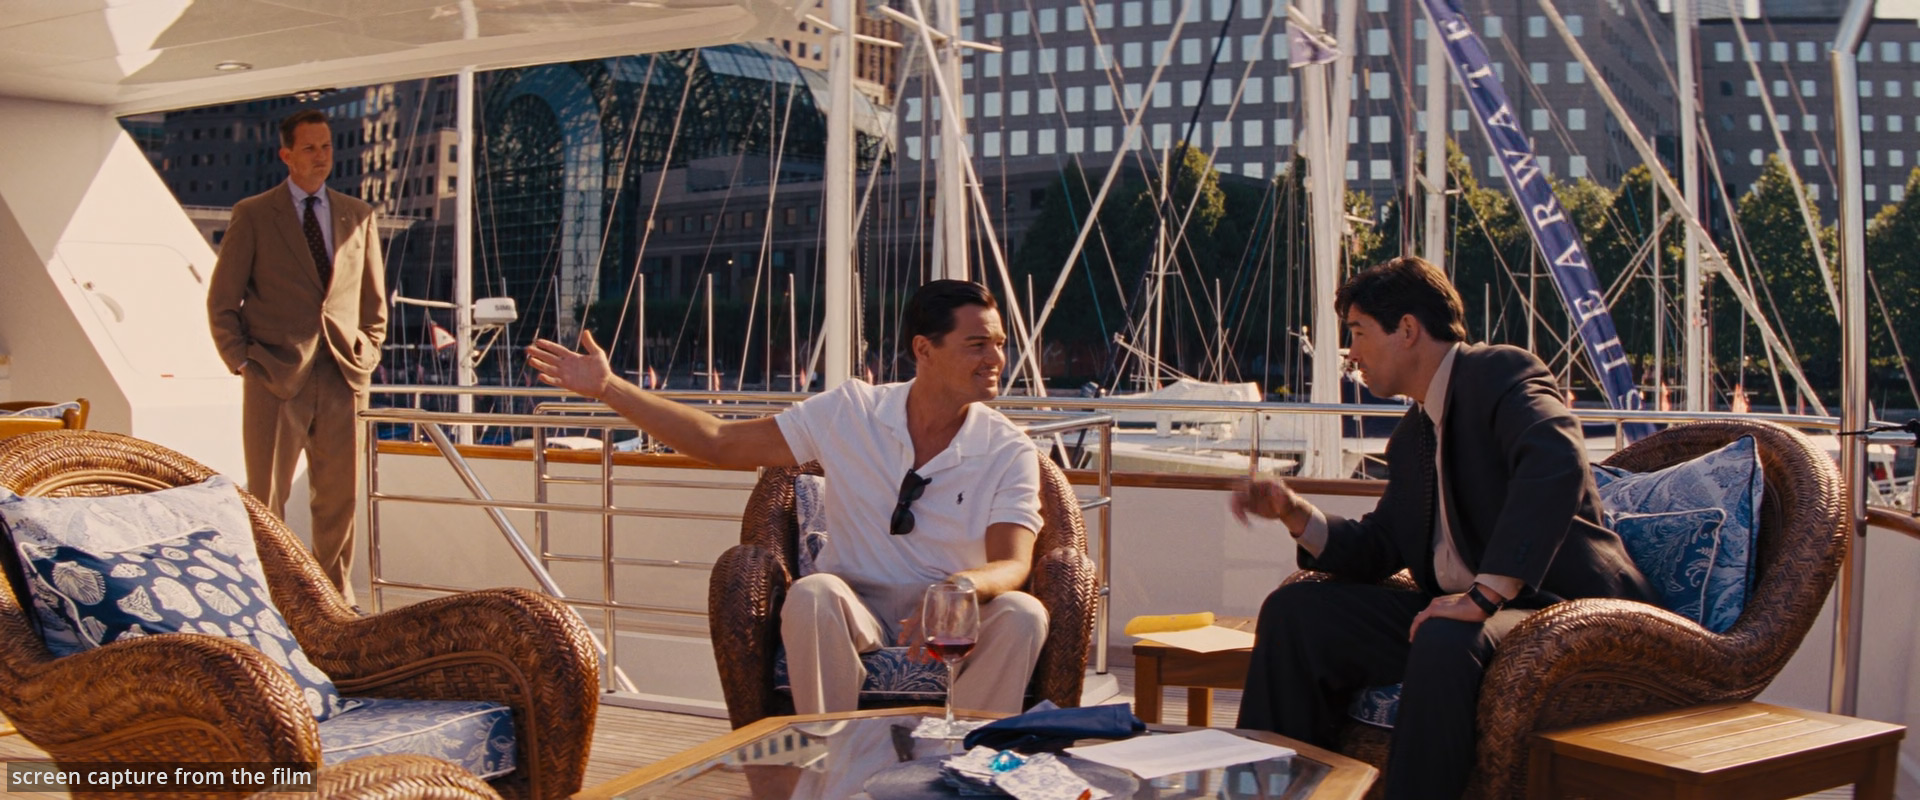 wolf of wall street yacht captain